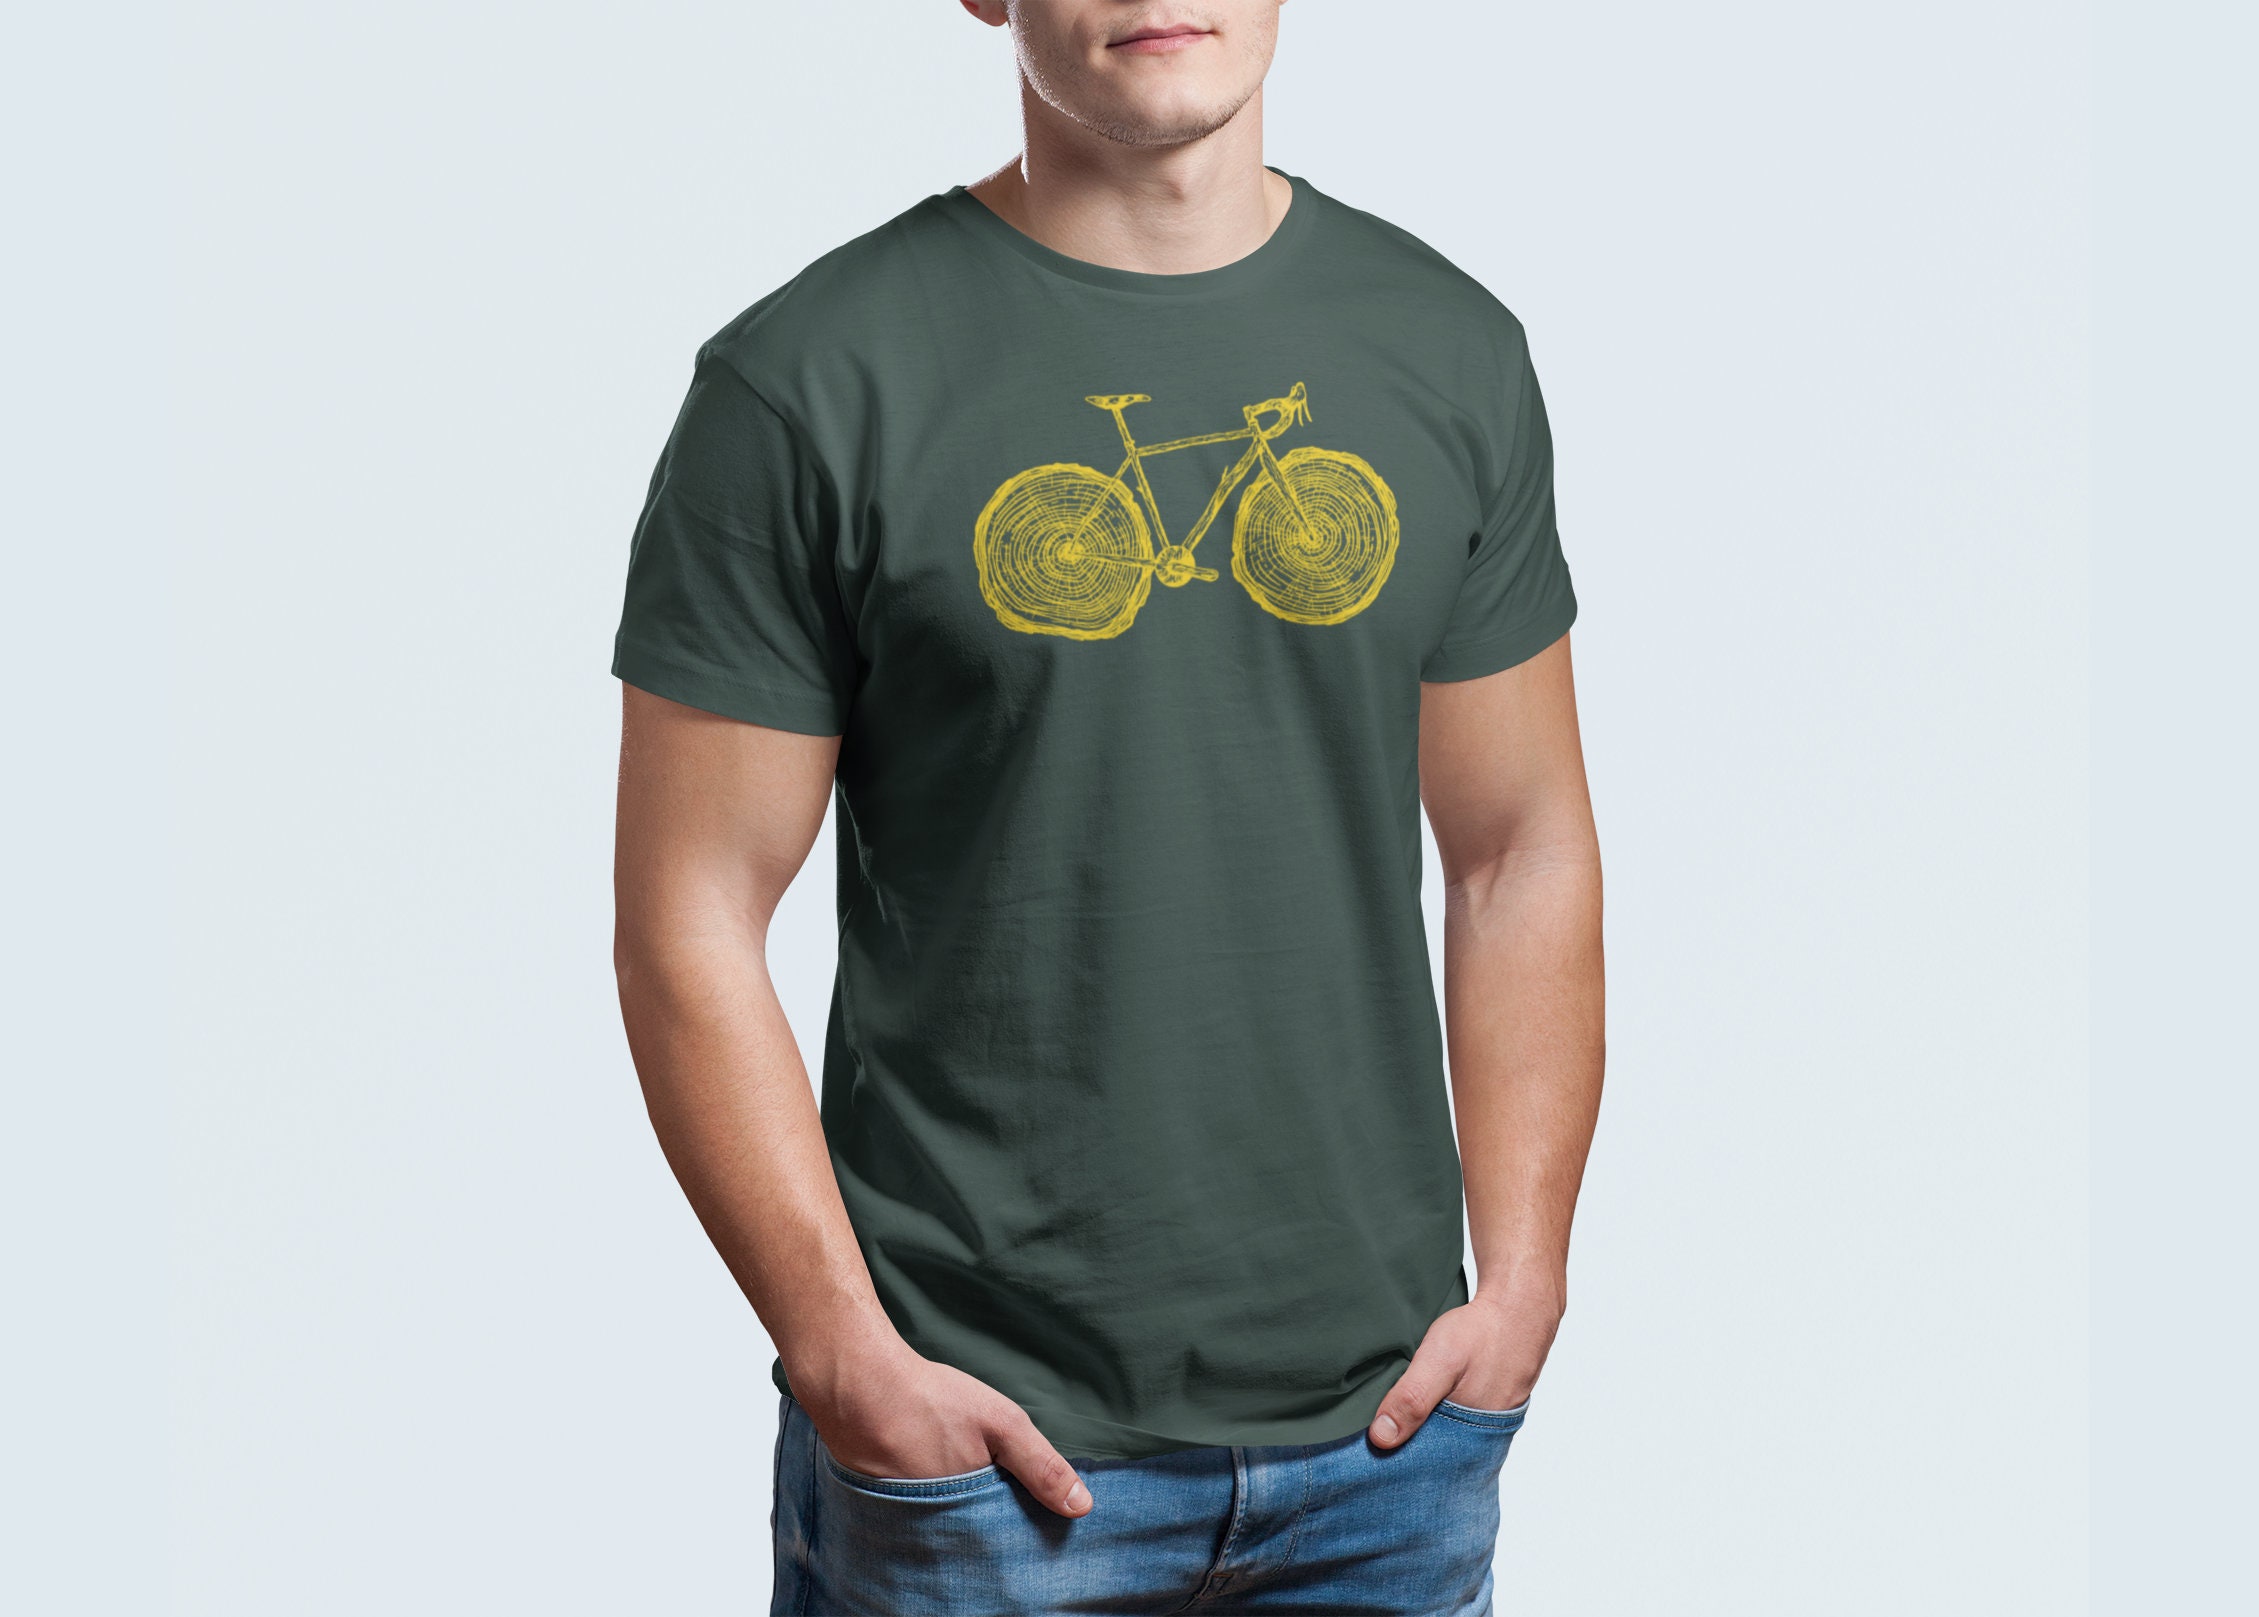 Sequoia Wooden Tree Cyclocross Bike Cycling Shirt Gift for Daddy ...